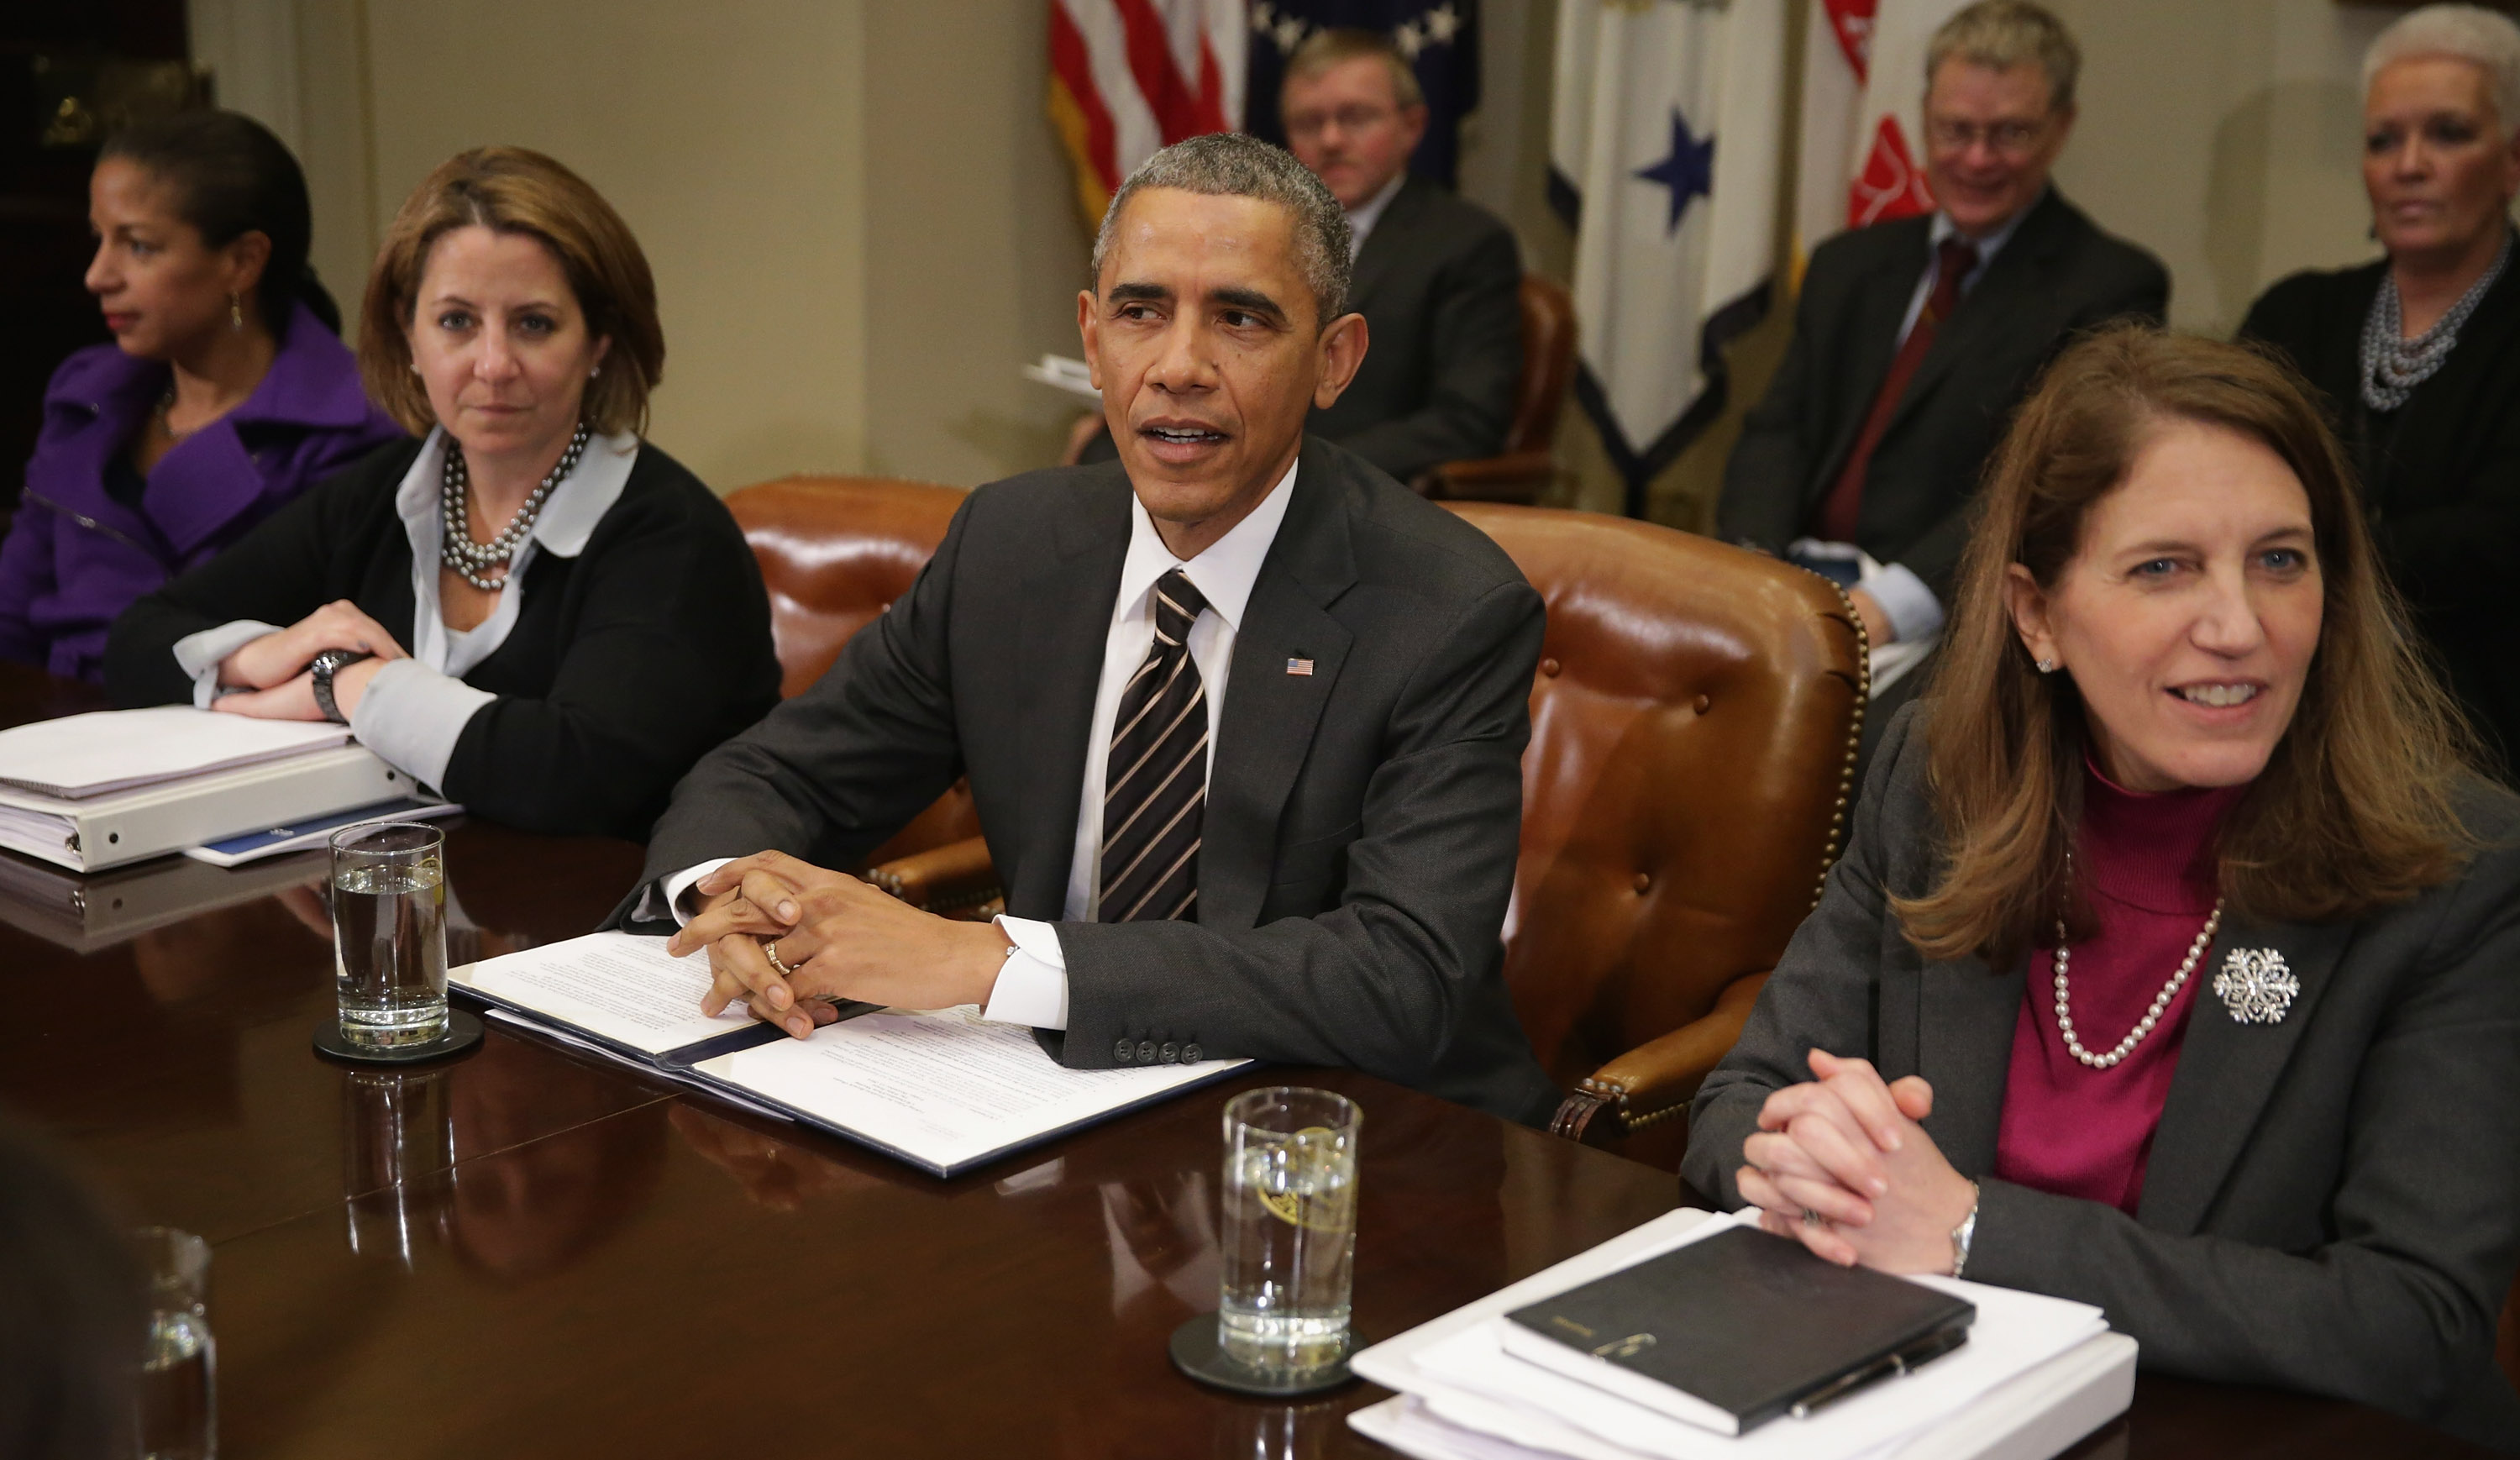 Presiden Obama delivers remarks to reporters before meeting with (L-R) National Security Advisor Susan Rice, Homeland Security Advisor Lisa Monaco, Health and Human Services Secretary Sylvia Matthews Burwell and other members on Dec. 12, 2014 in Washington, DC. (Chip Somodevilla—Getty Images)